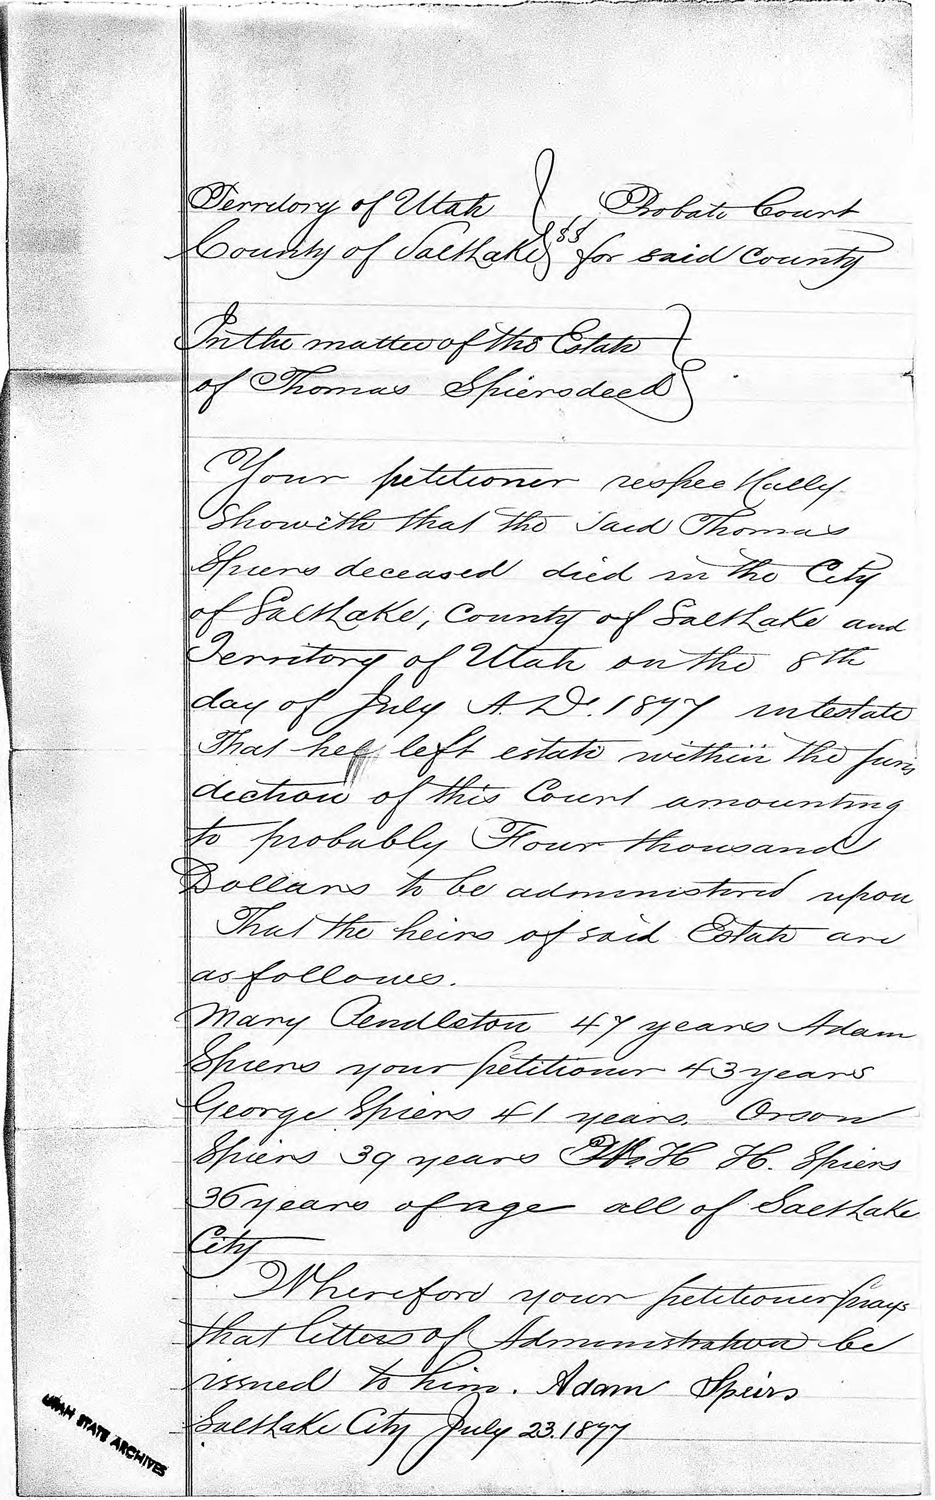 The Probate Record of Thomas Speirs